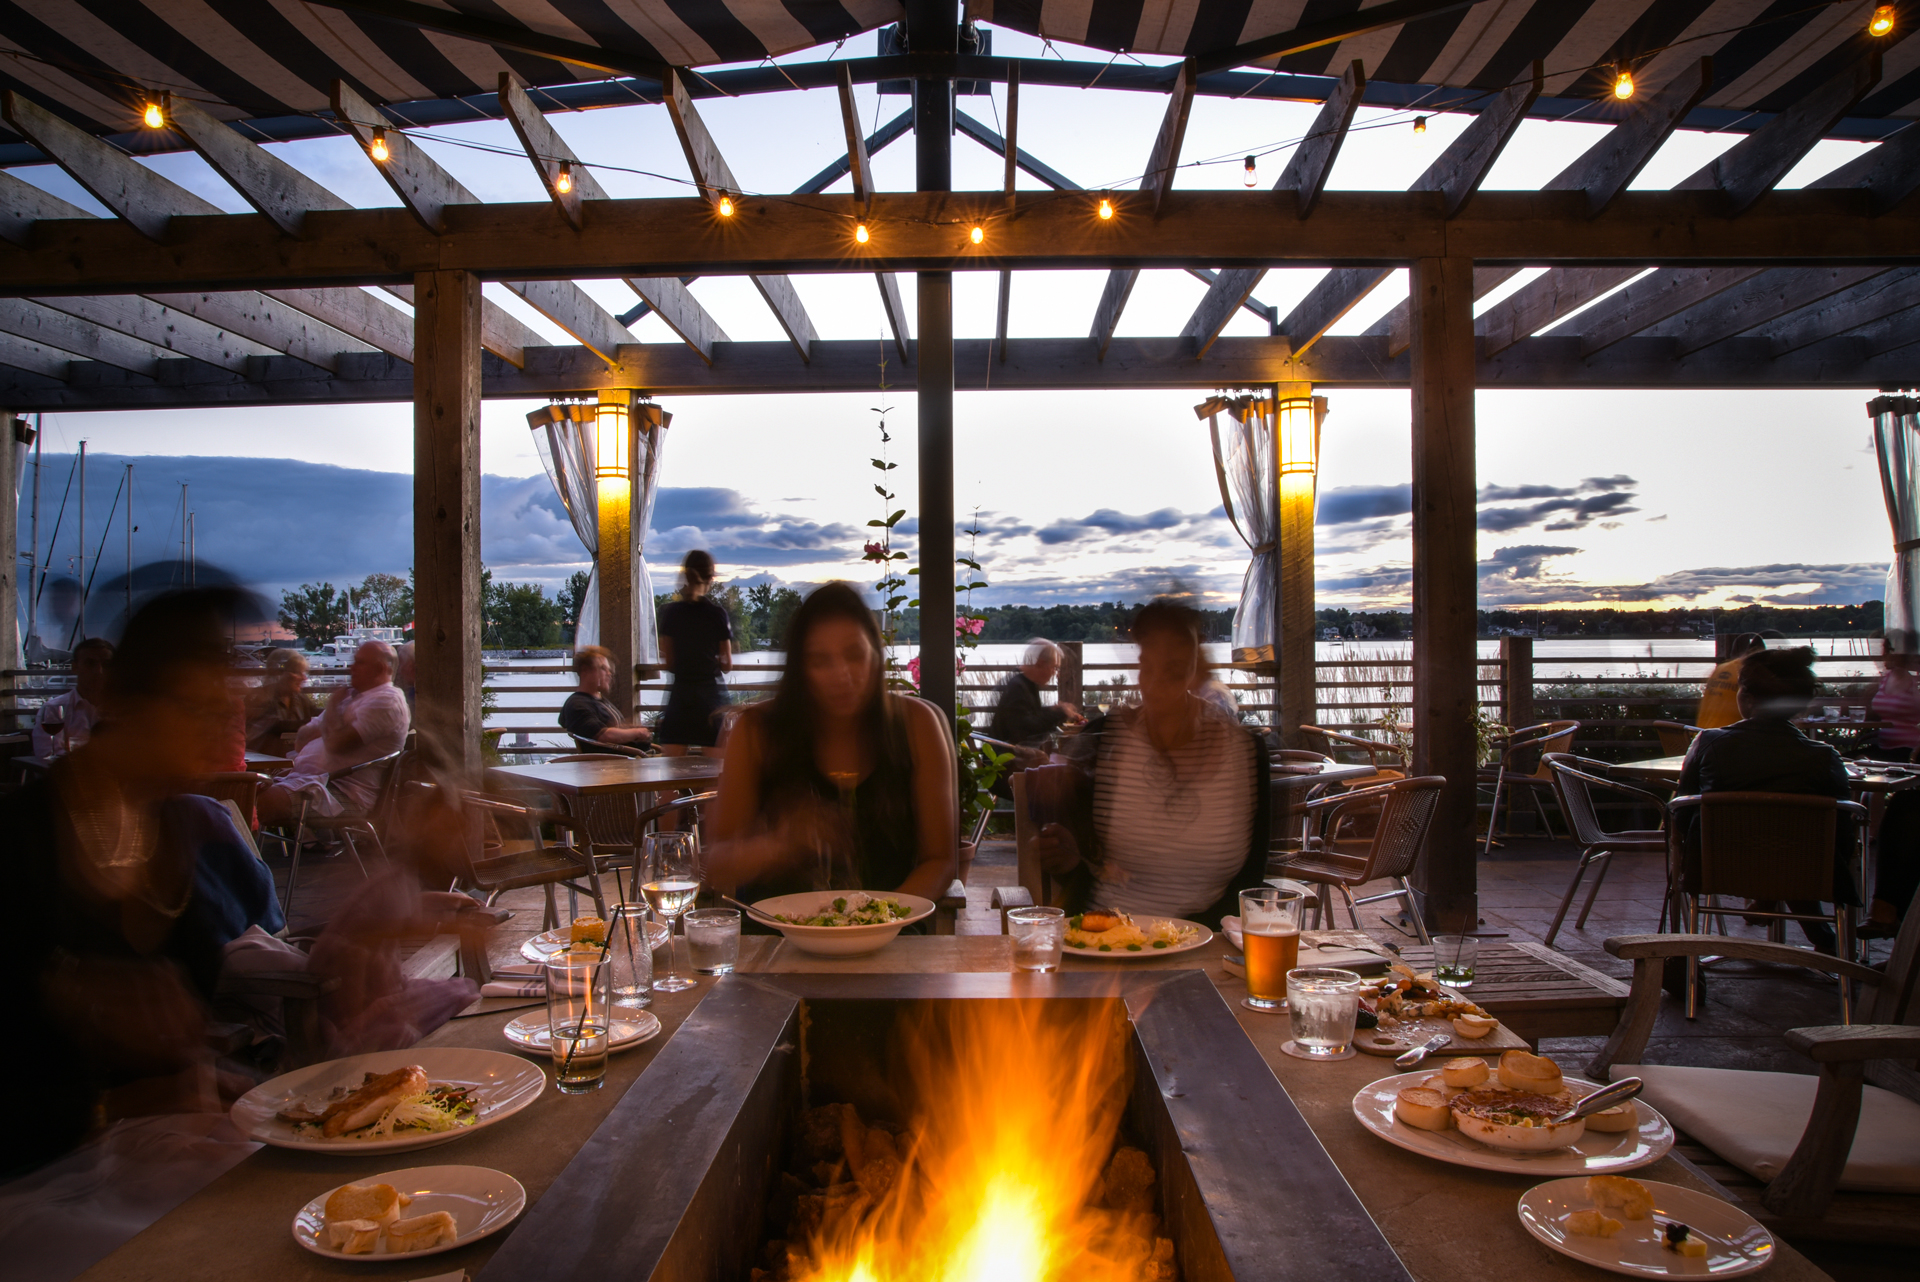 People eating around outdoor fireplace on patio